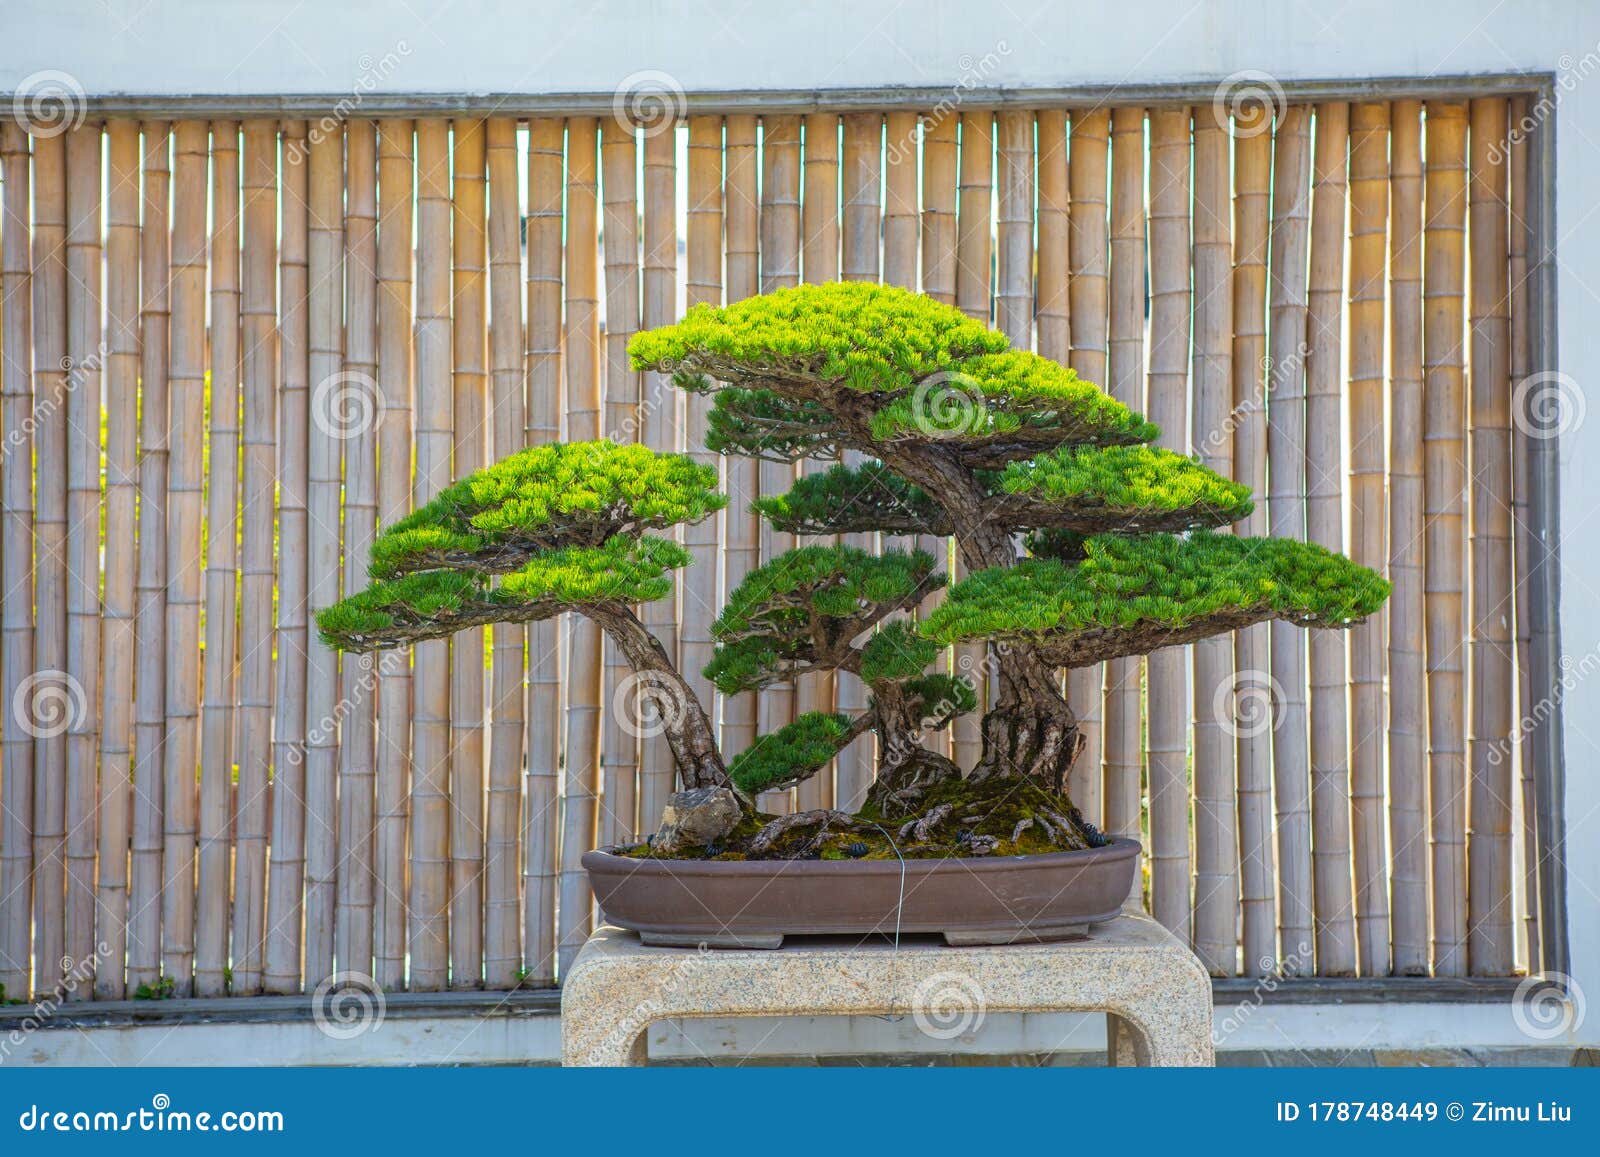 555 Banzai Trees Royalty-Free Images, Stock Photos & Pictures